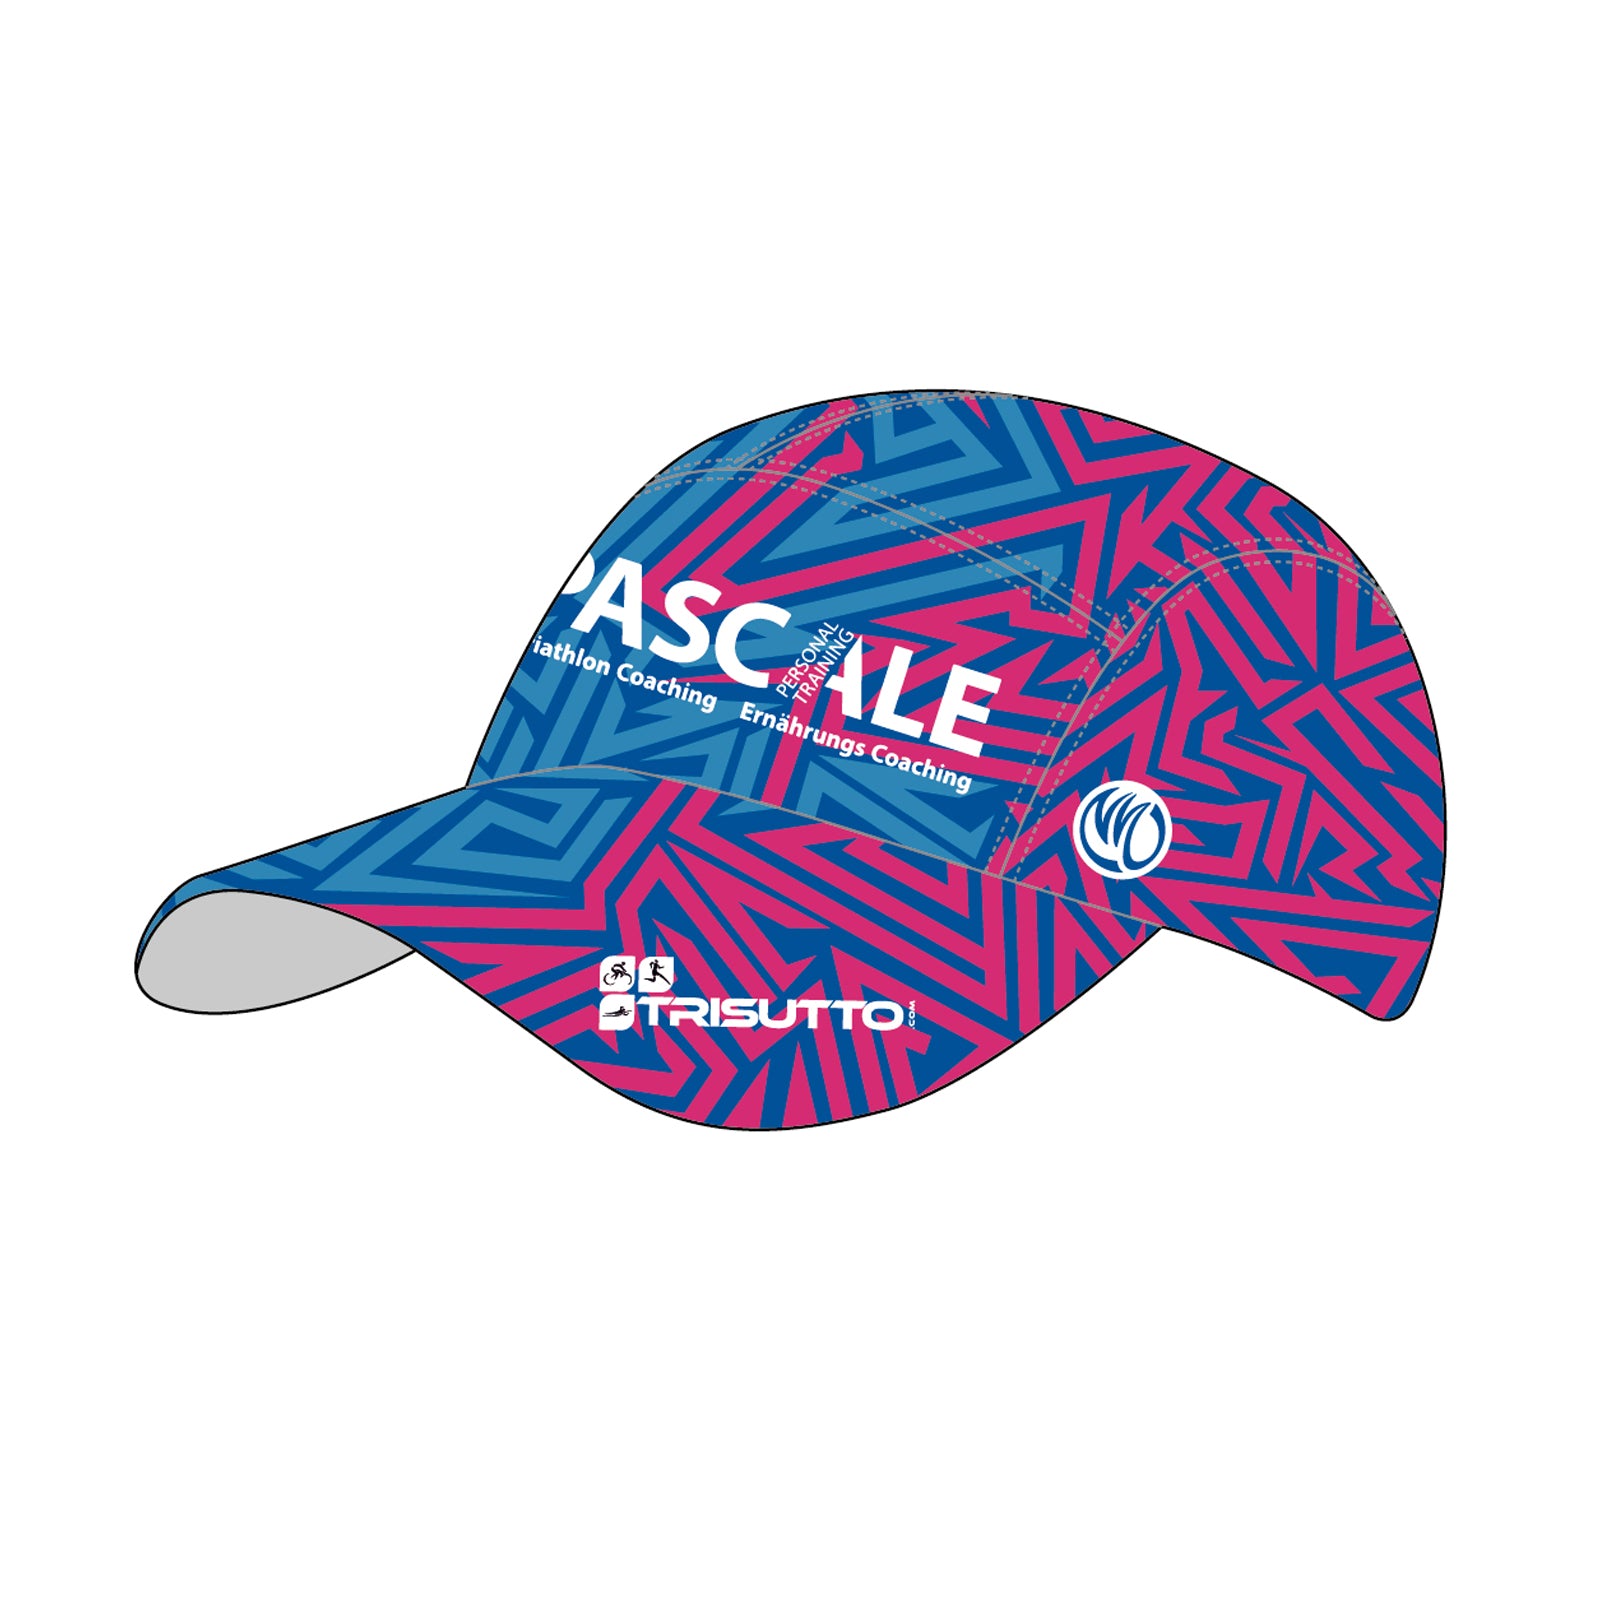 PASCALE Running Cap, Free Size